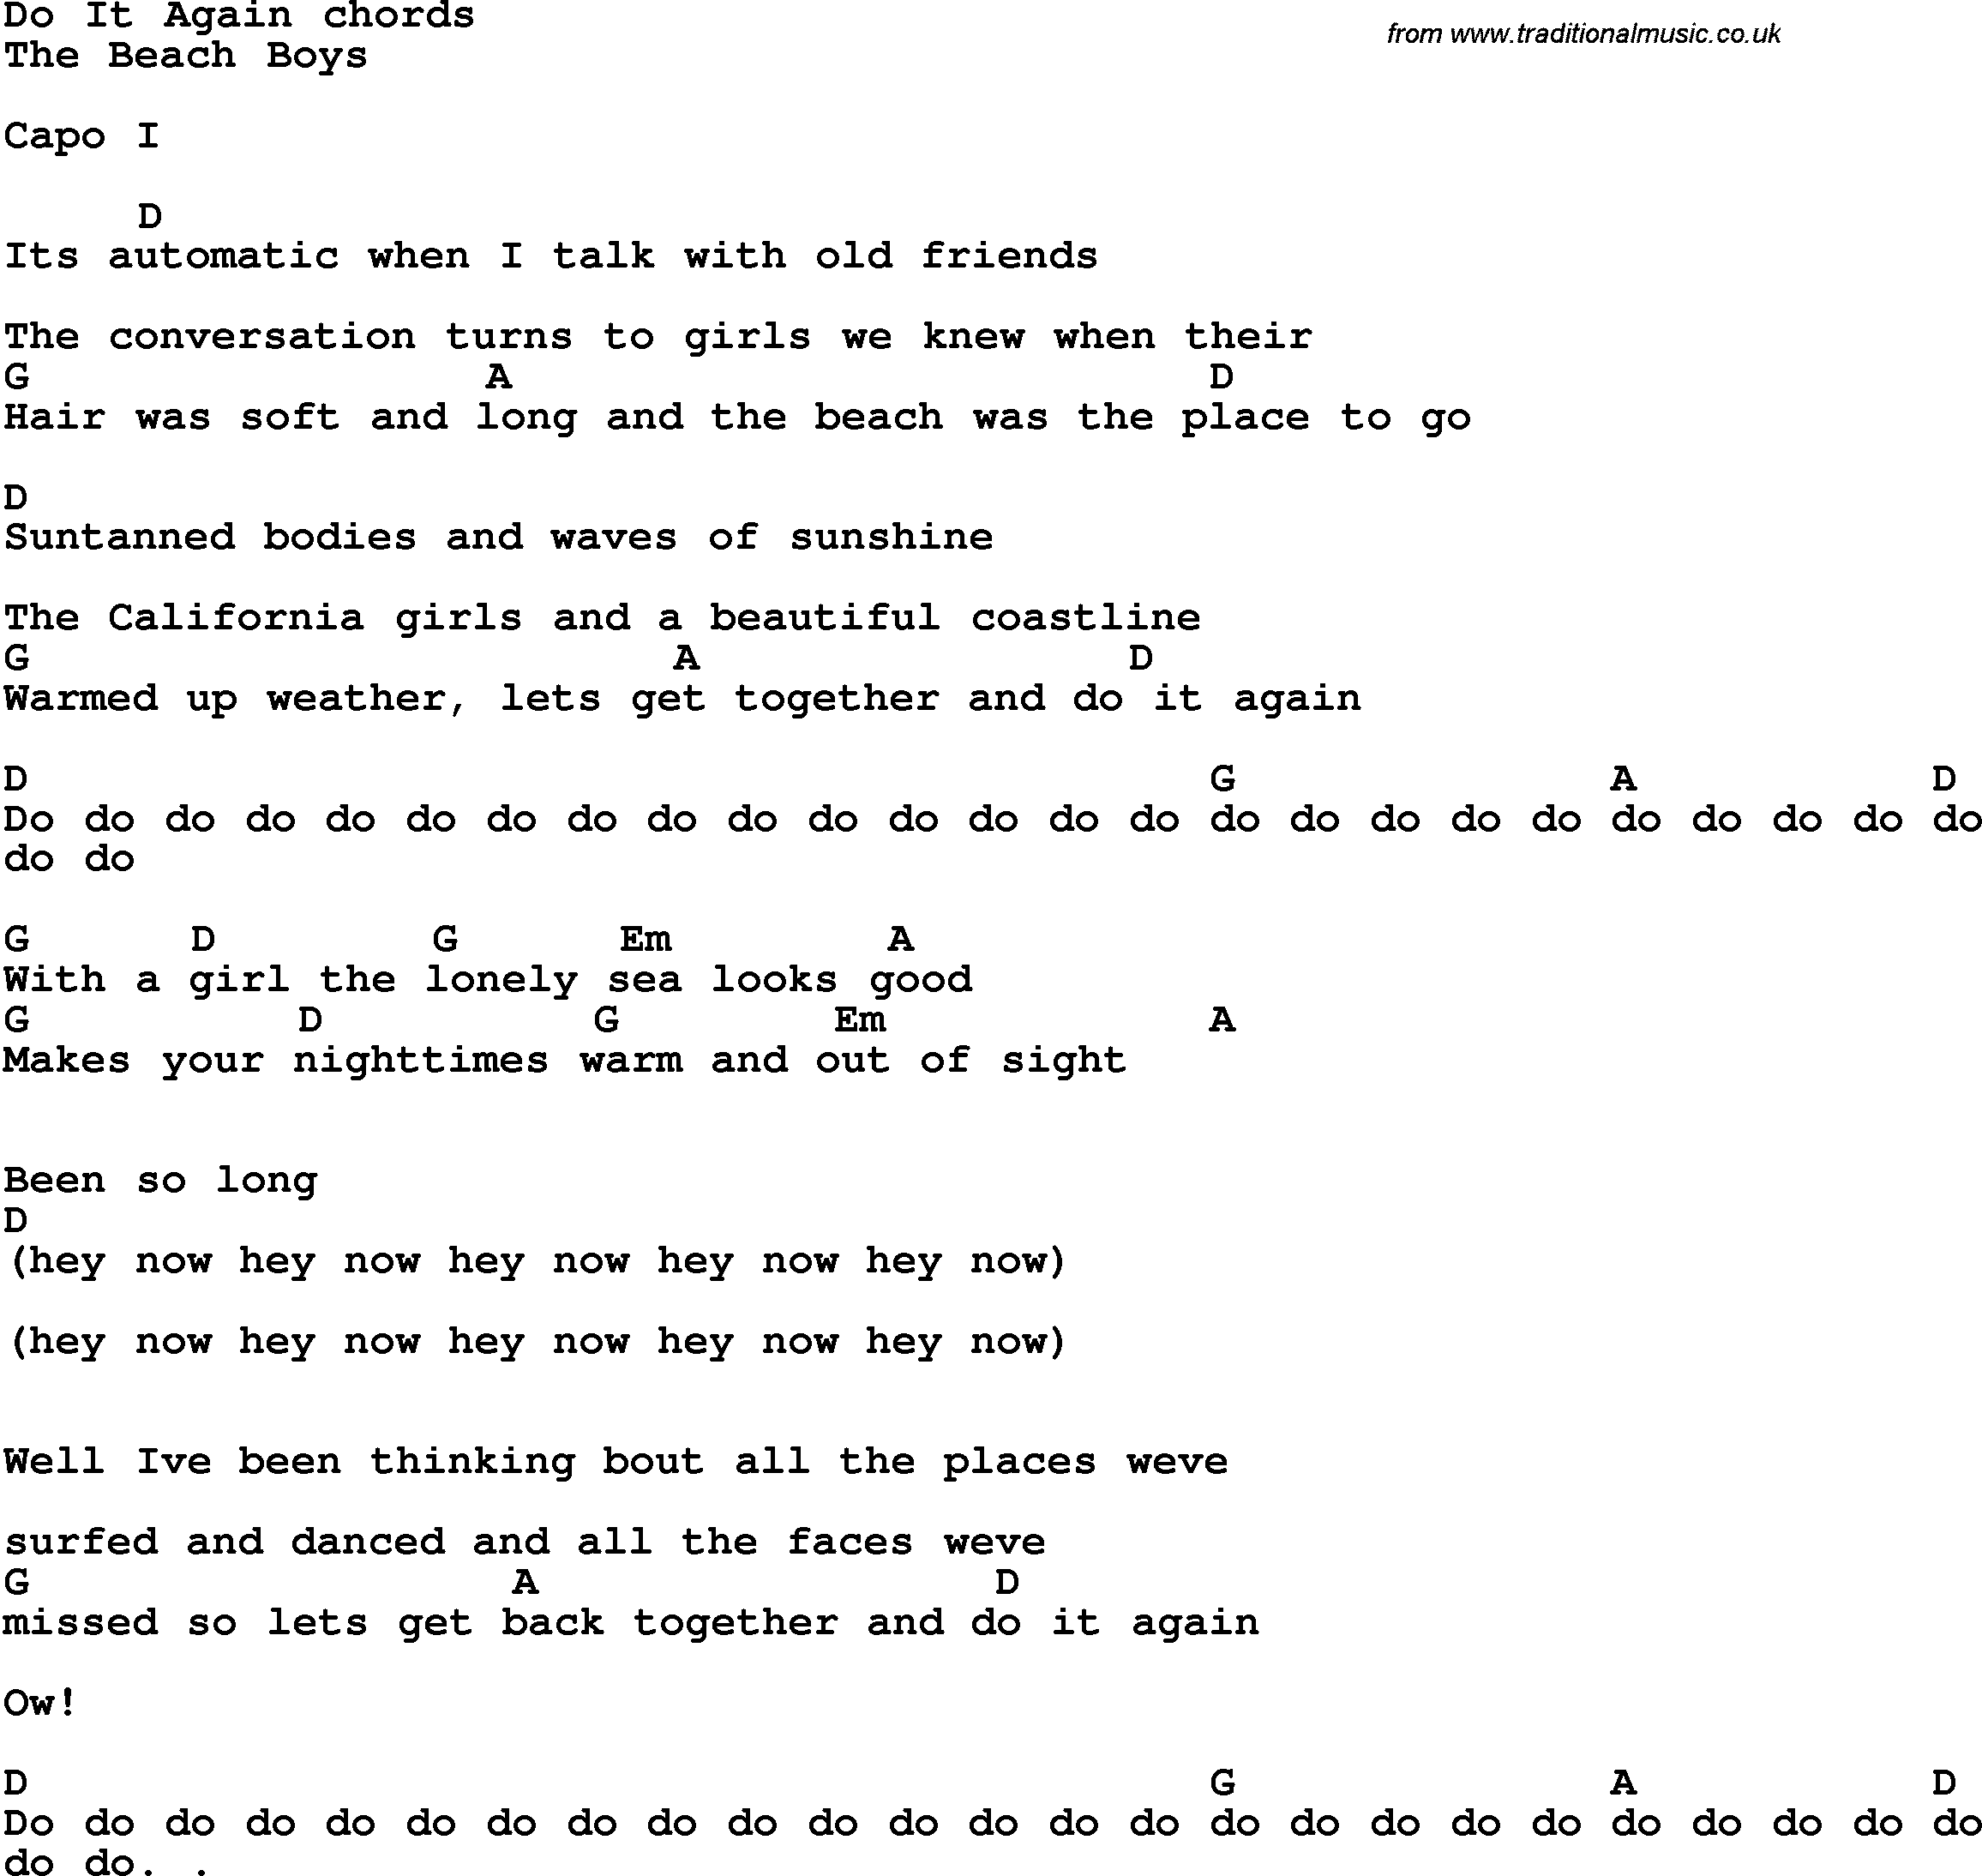 Song Lyrics with guitar chords for Do It Again